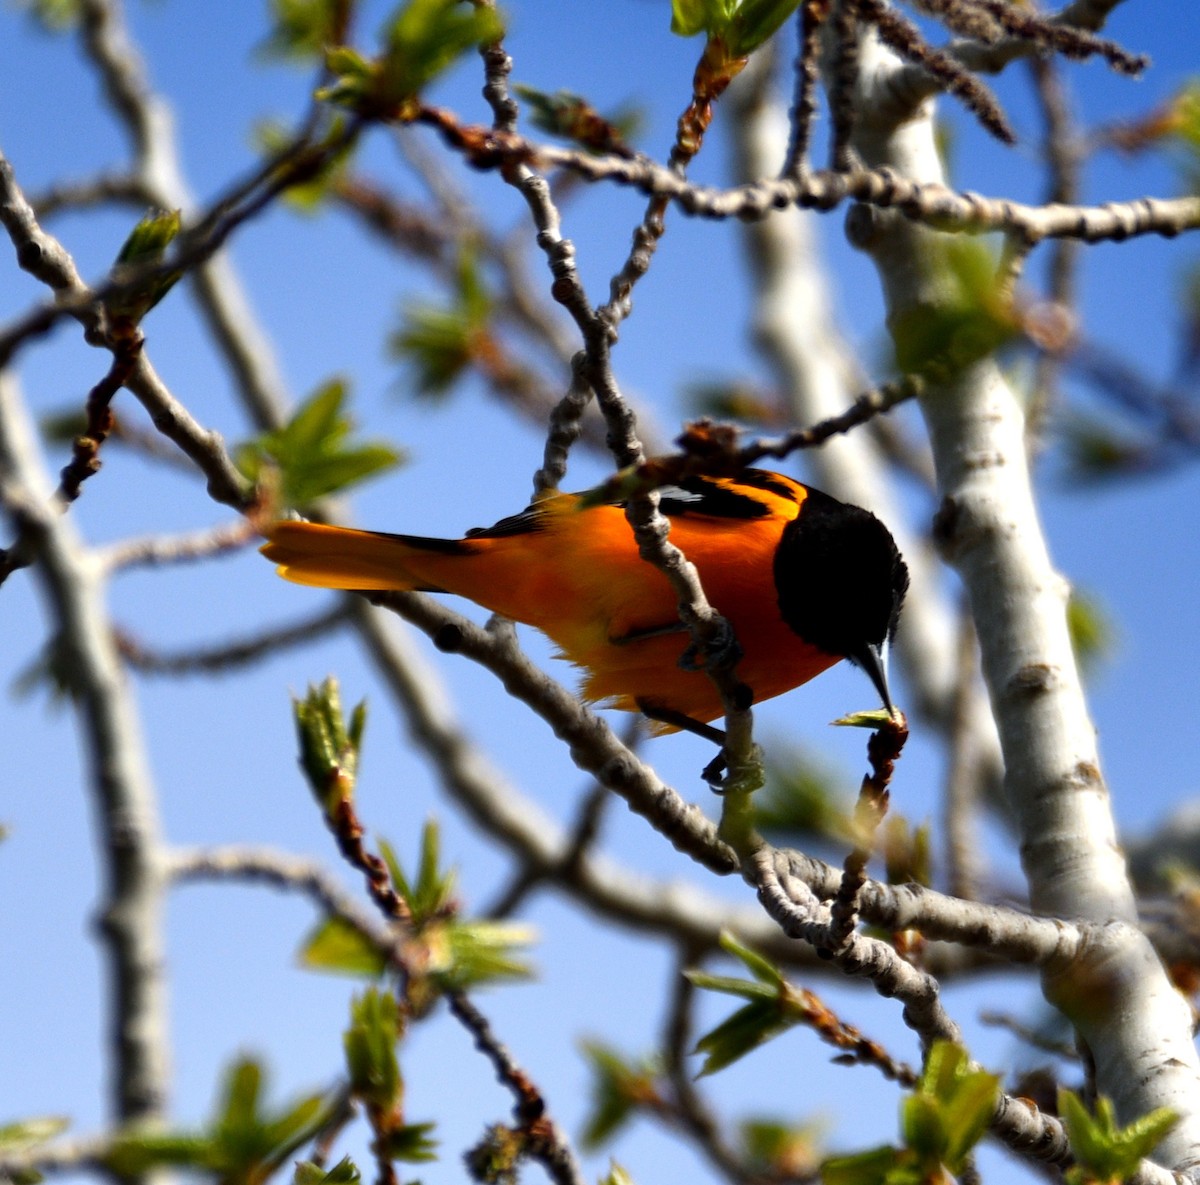 Baltimore Oriole - Dominic Thibeault